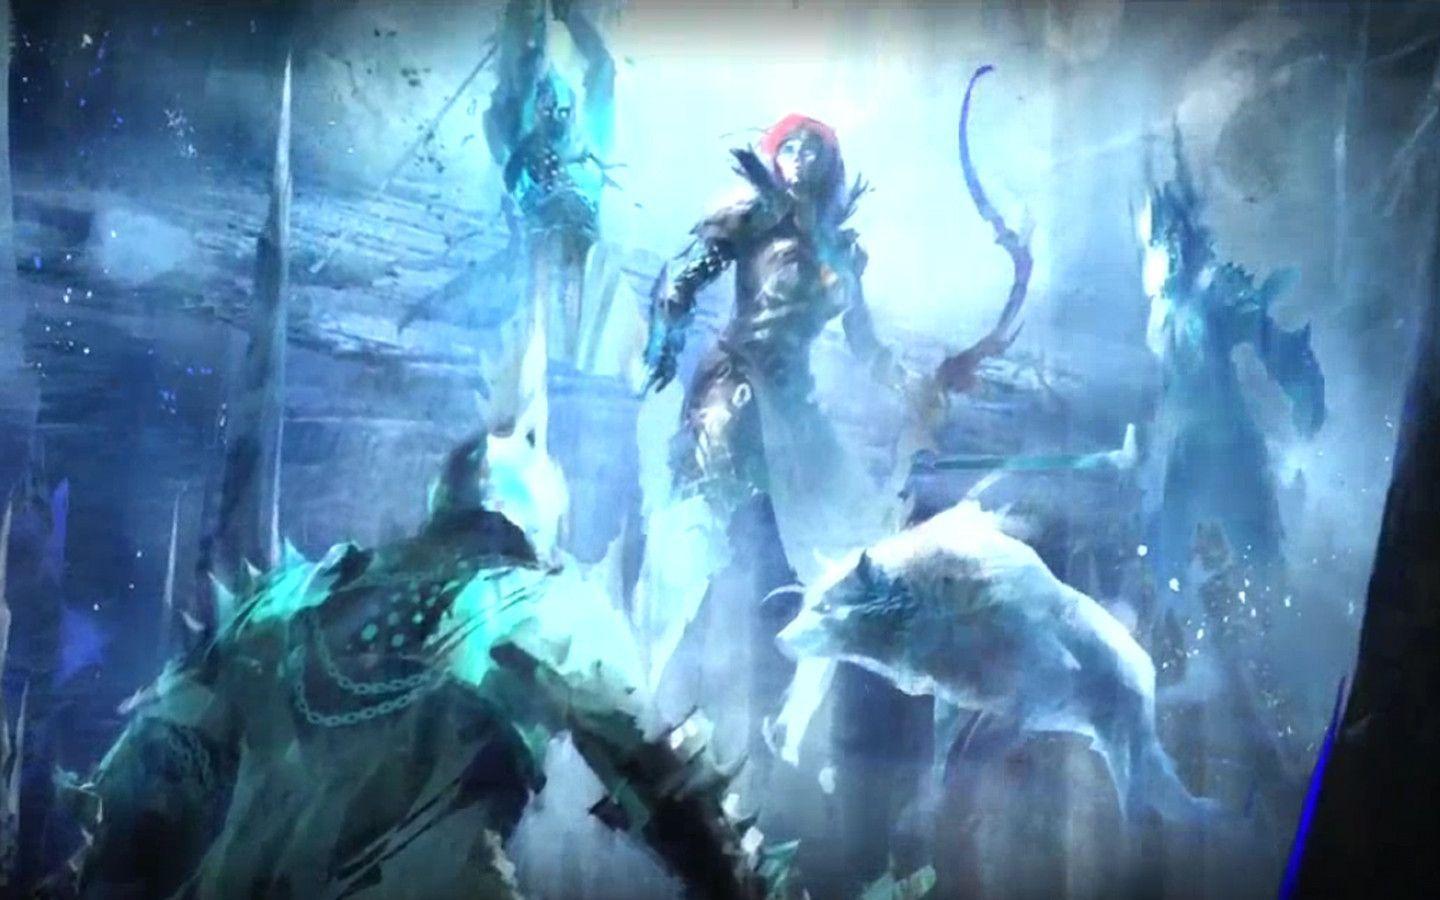 The Image of Guild Wars 2 Fresh HD Wallpaper